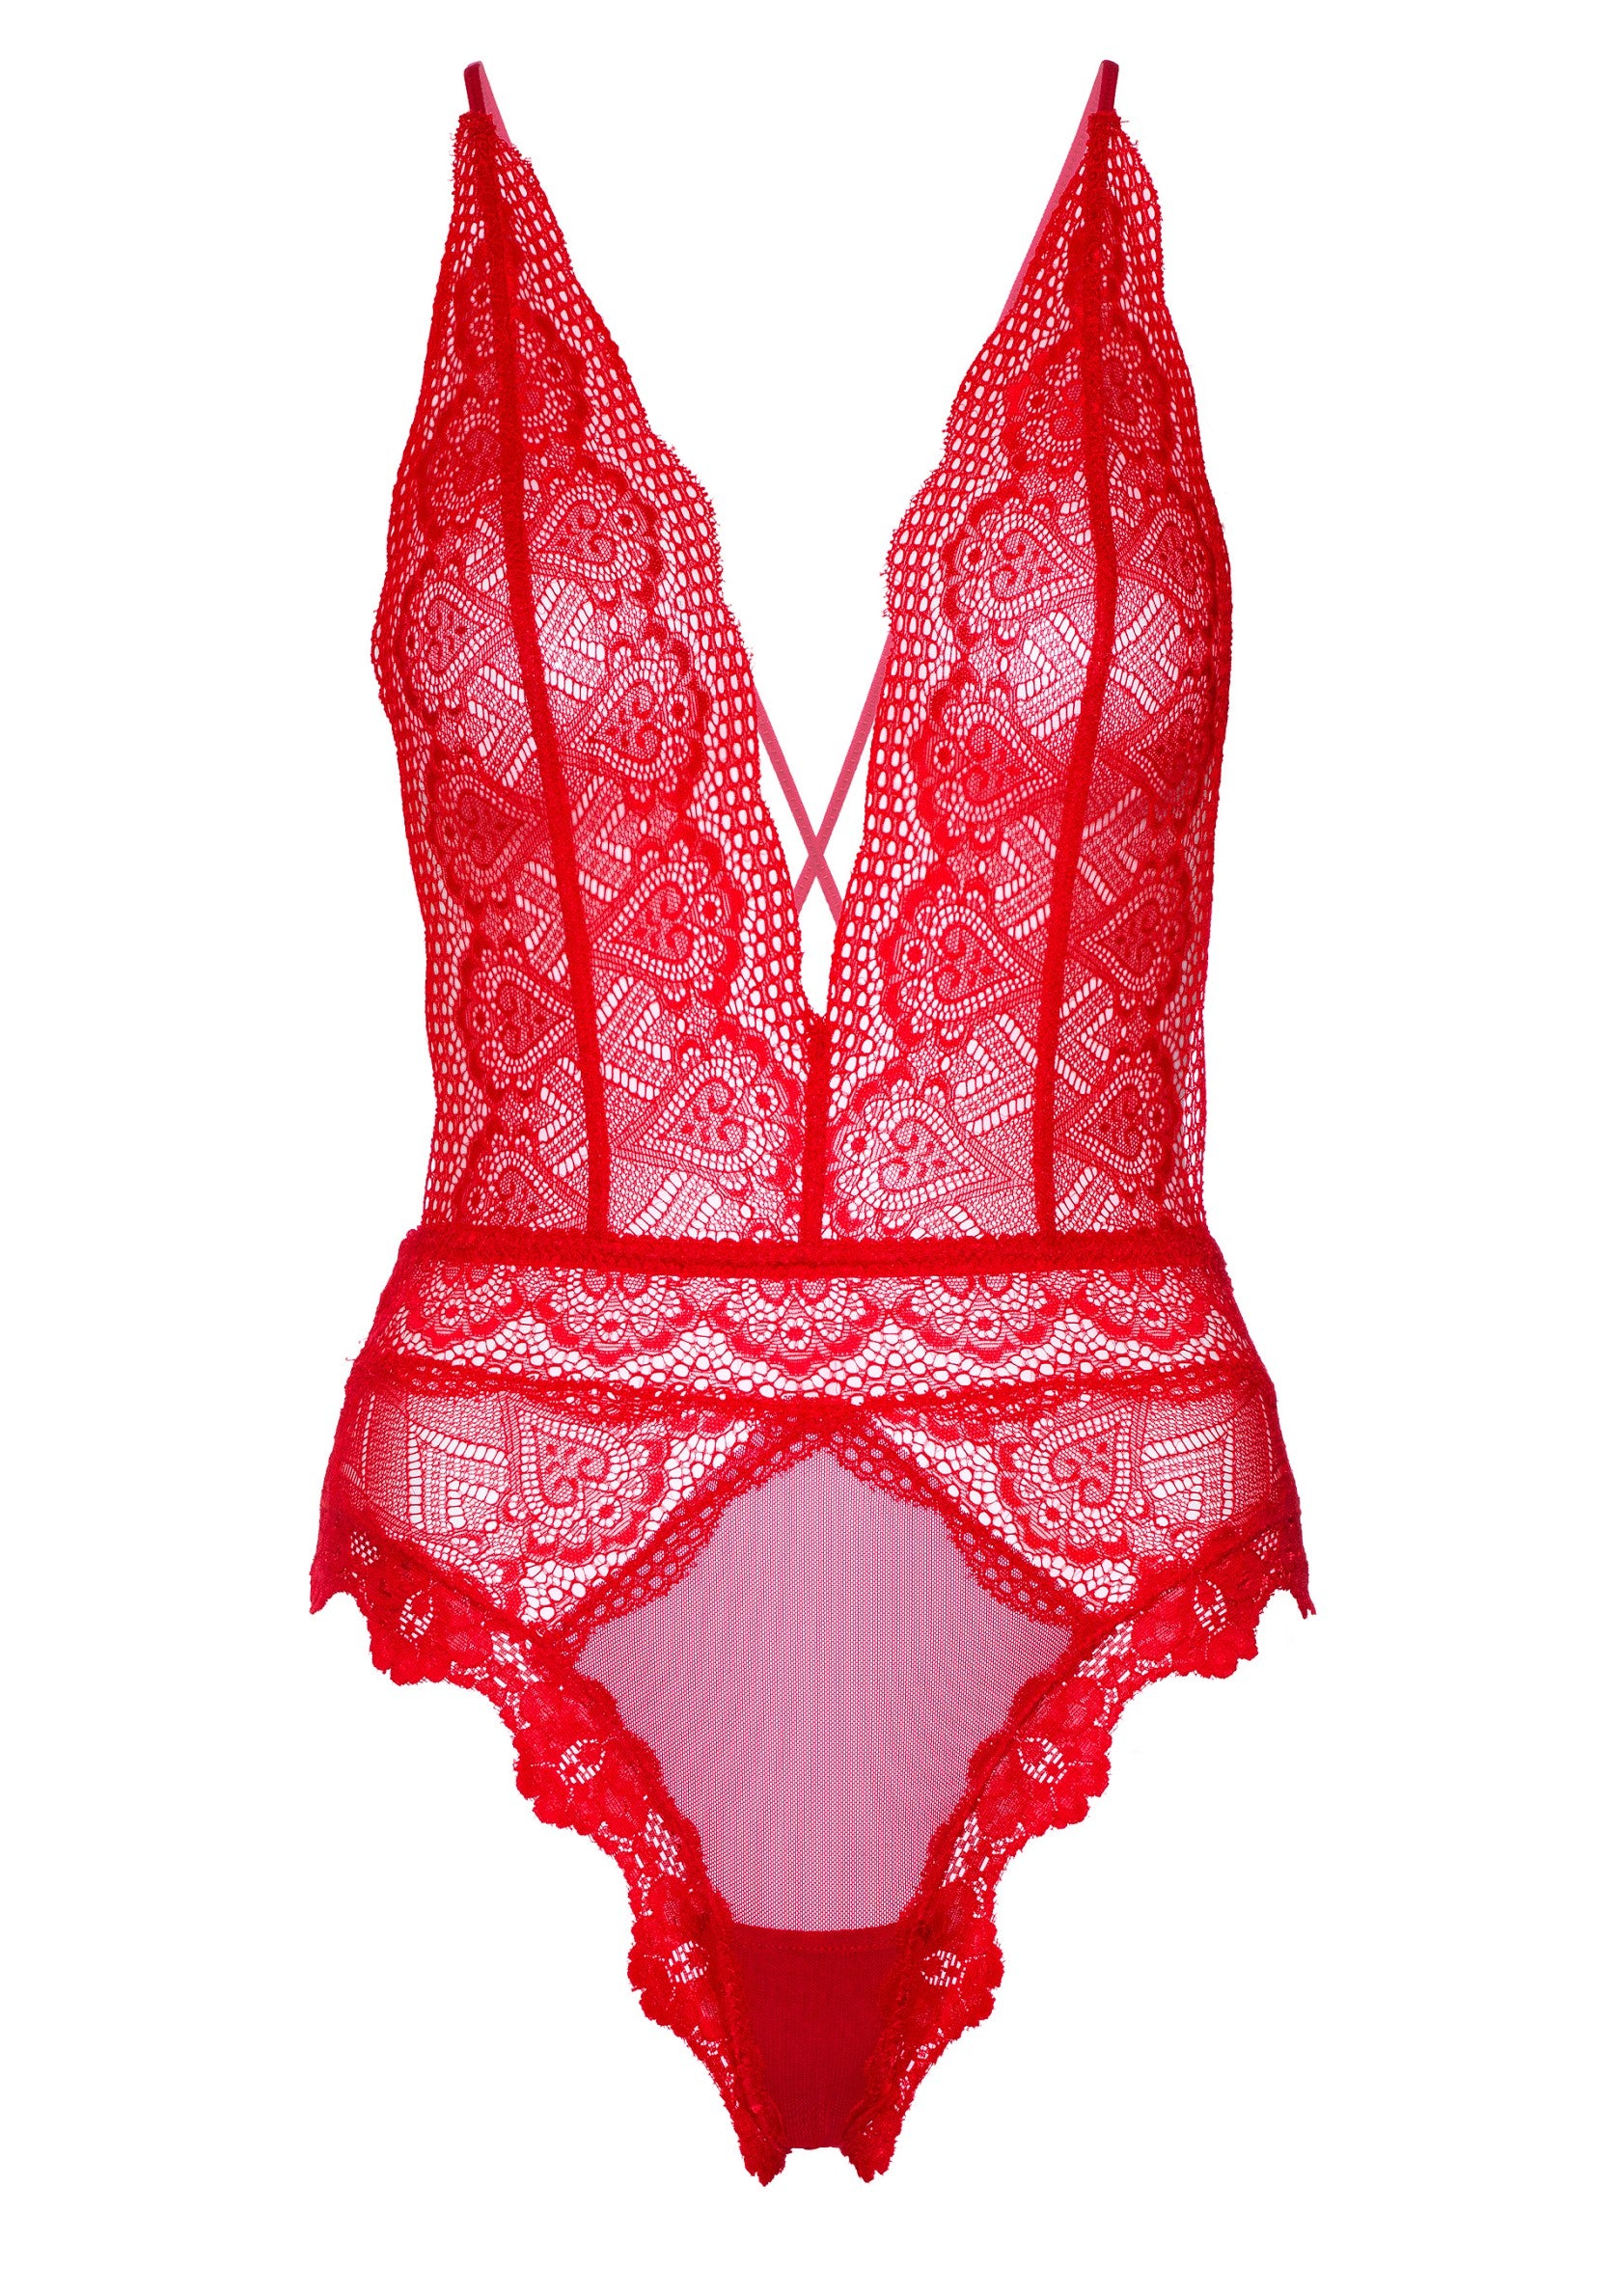 Daring Intimates Deep-V Lace Teddy RED S/M - 8